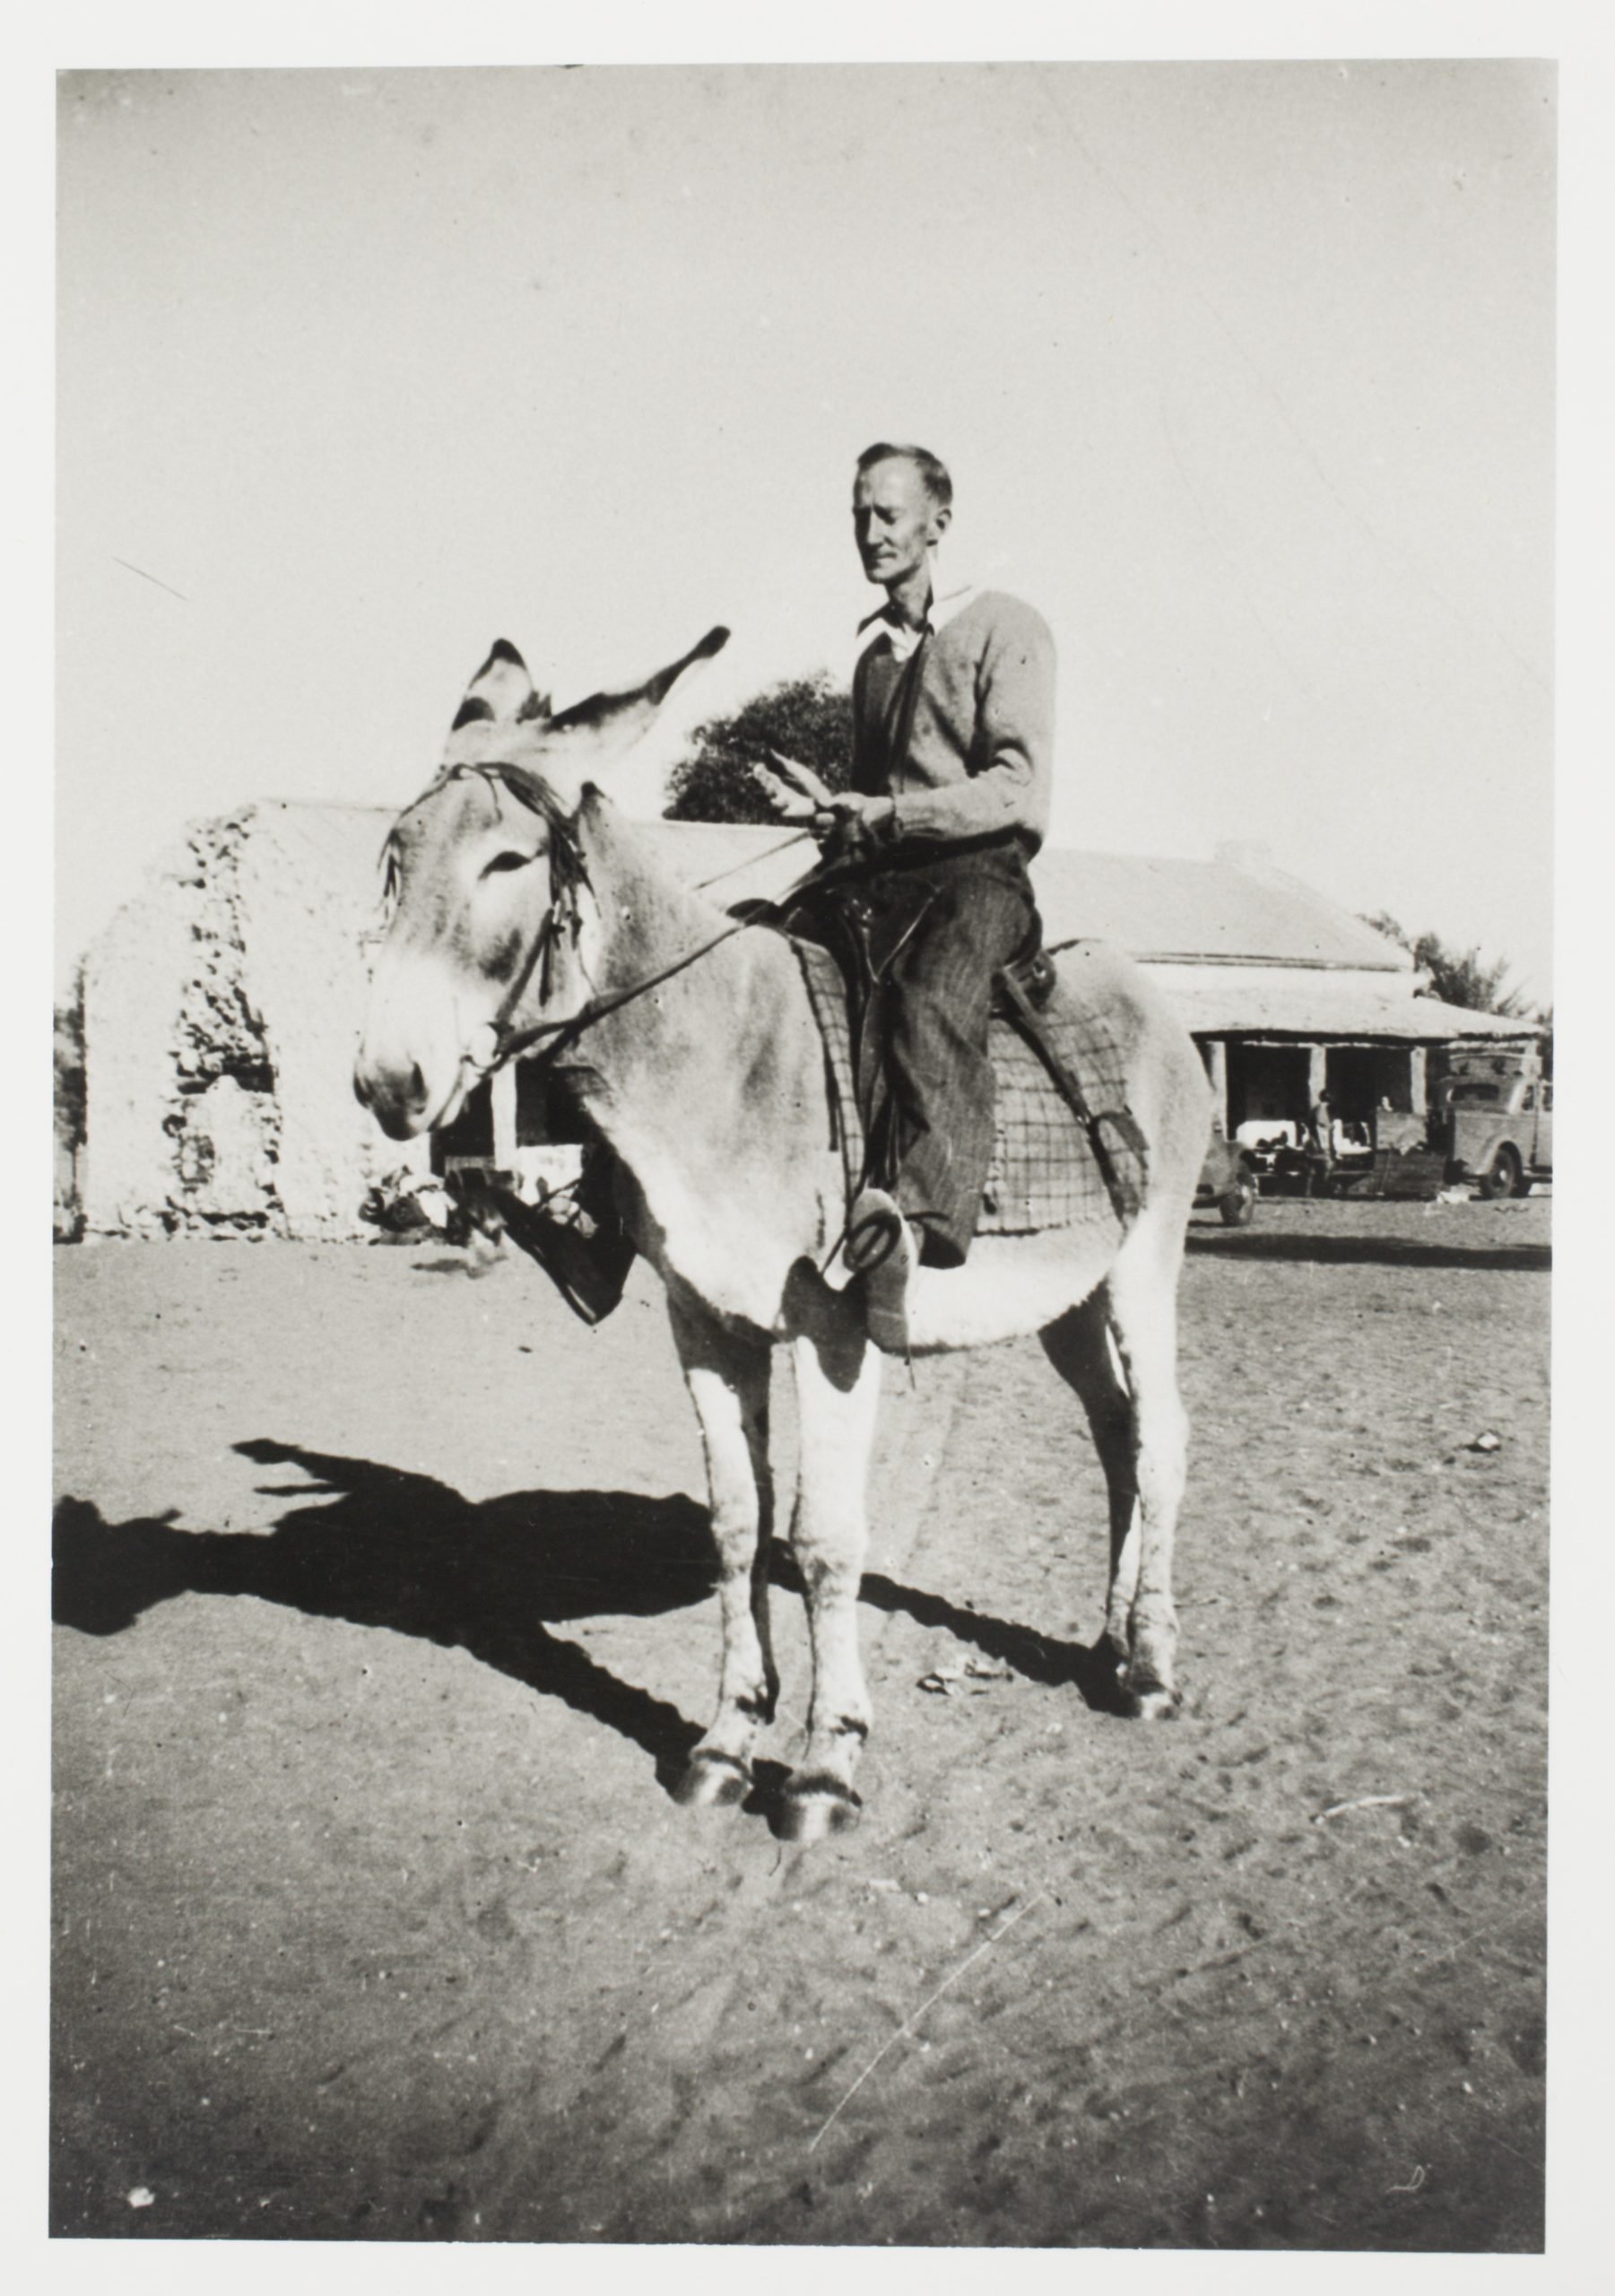 1937 – Father Smith on Donkey at the Bungalow